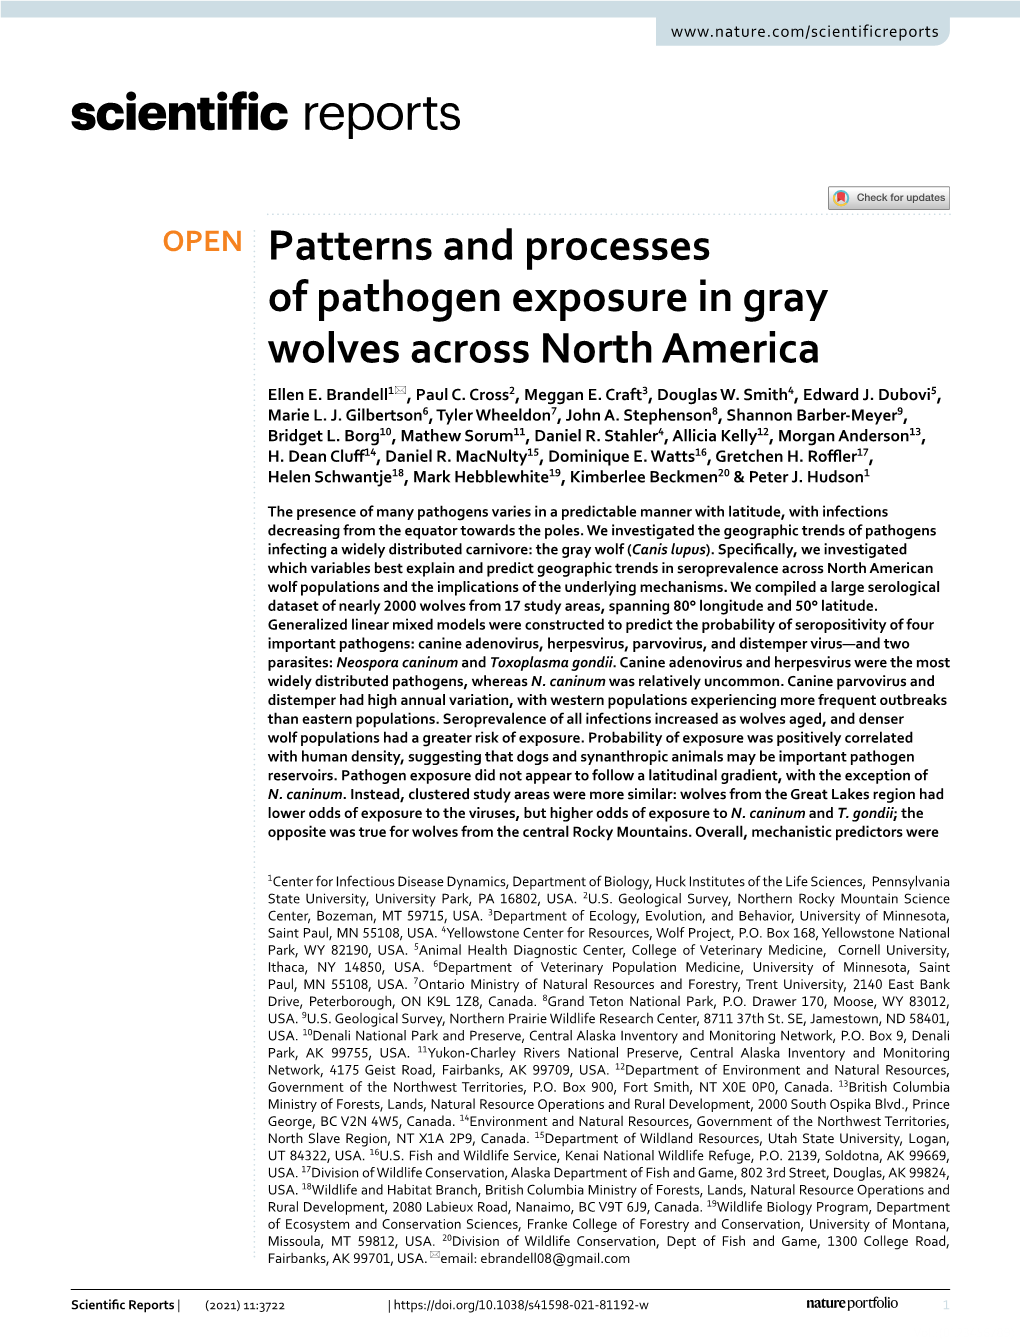 Patterns and Processes of Pathogen Exposure in Gray Wolves Across North America Ellen E